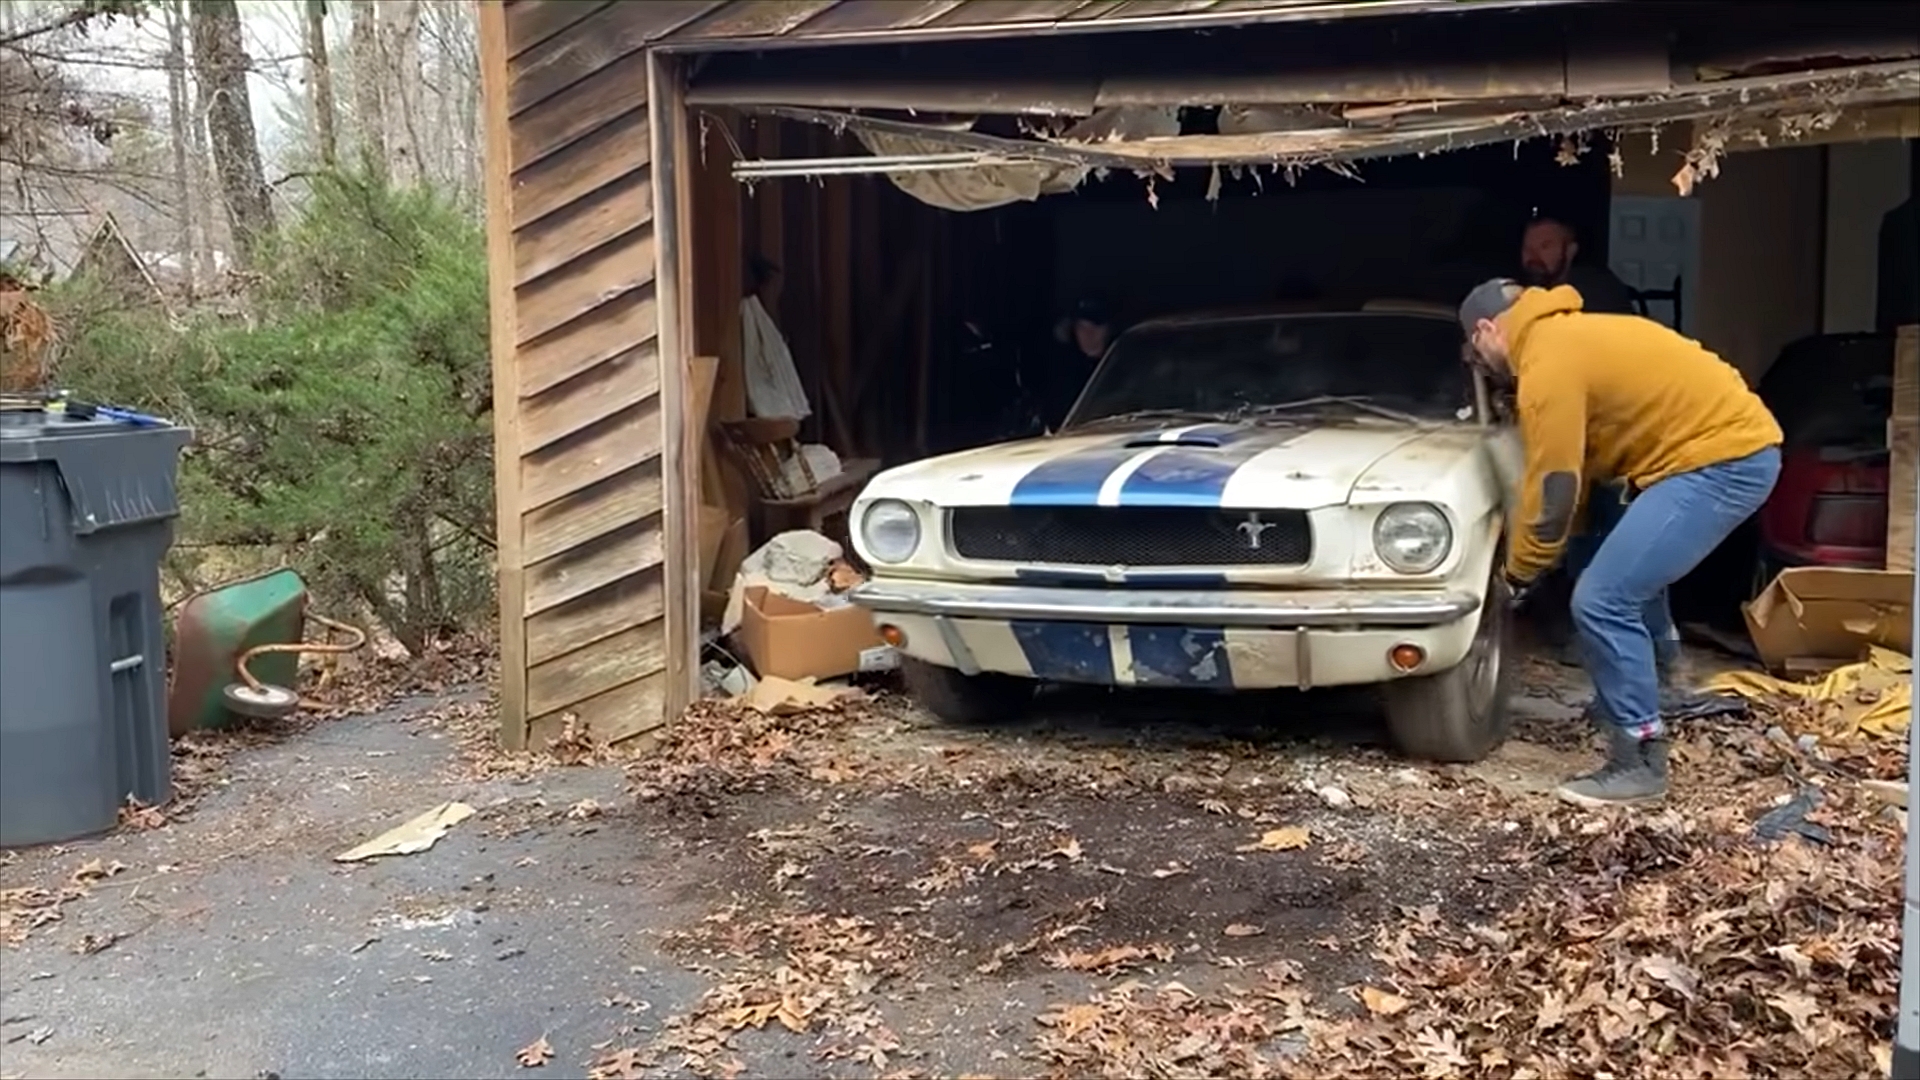 barn find gold 1965 shelby mustang gt350 stored for decades in abandoned house 178974 1